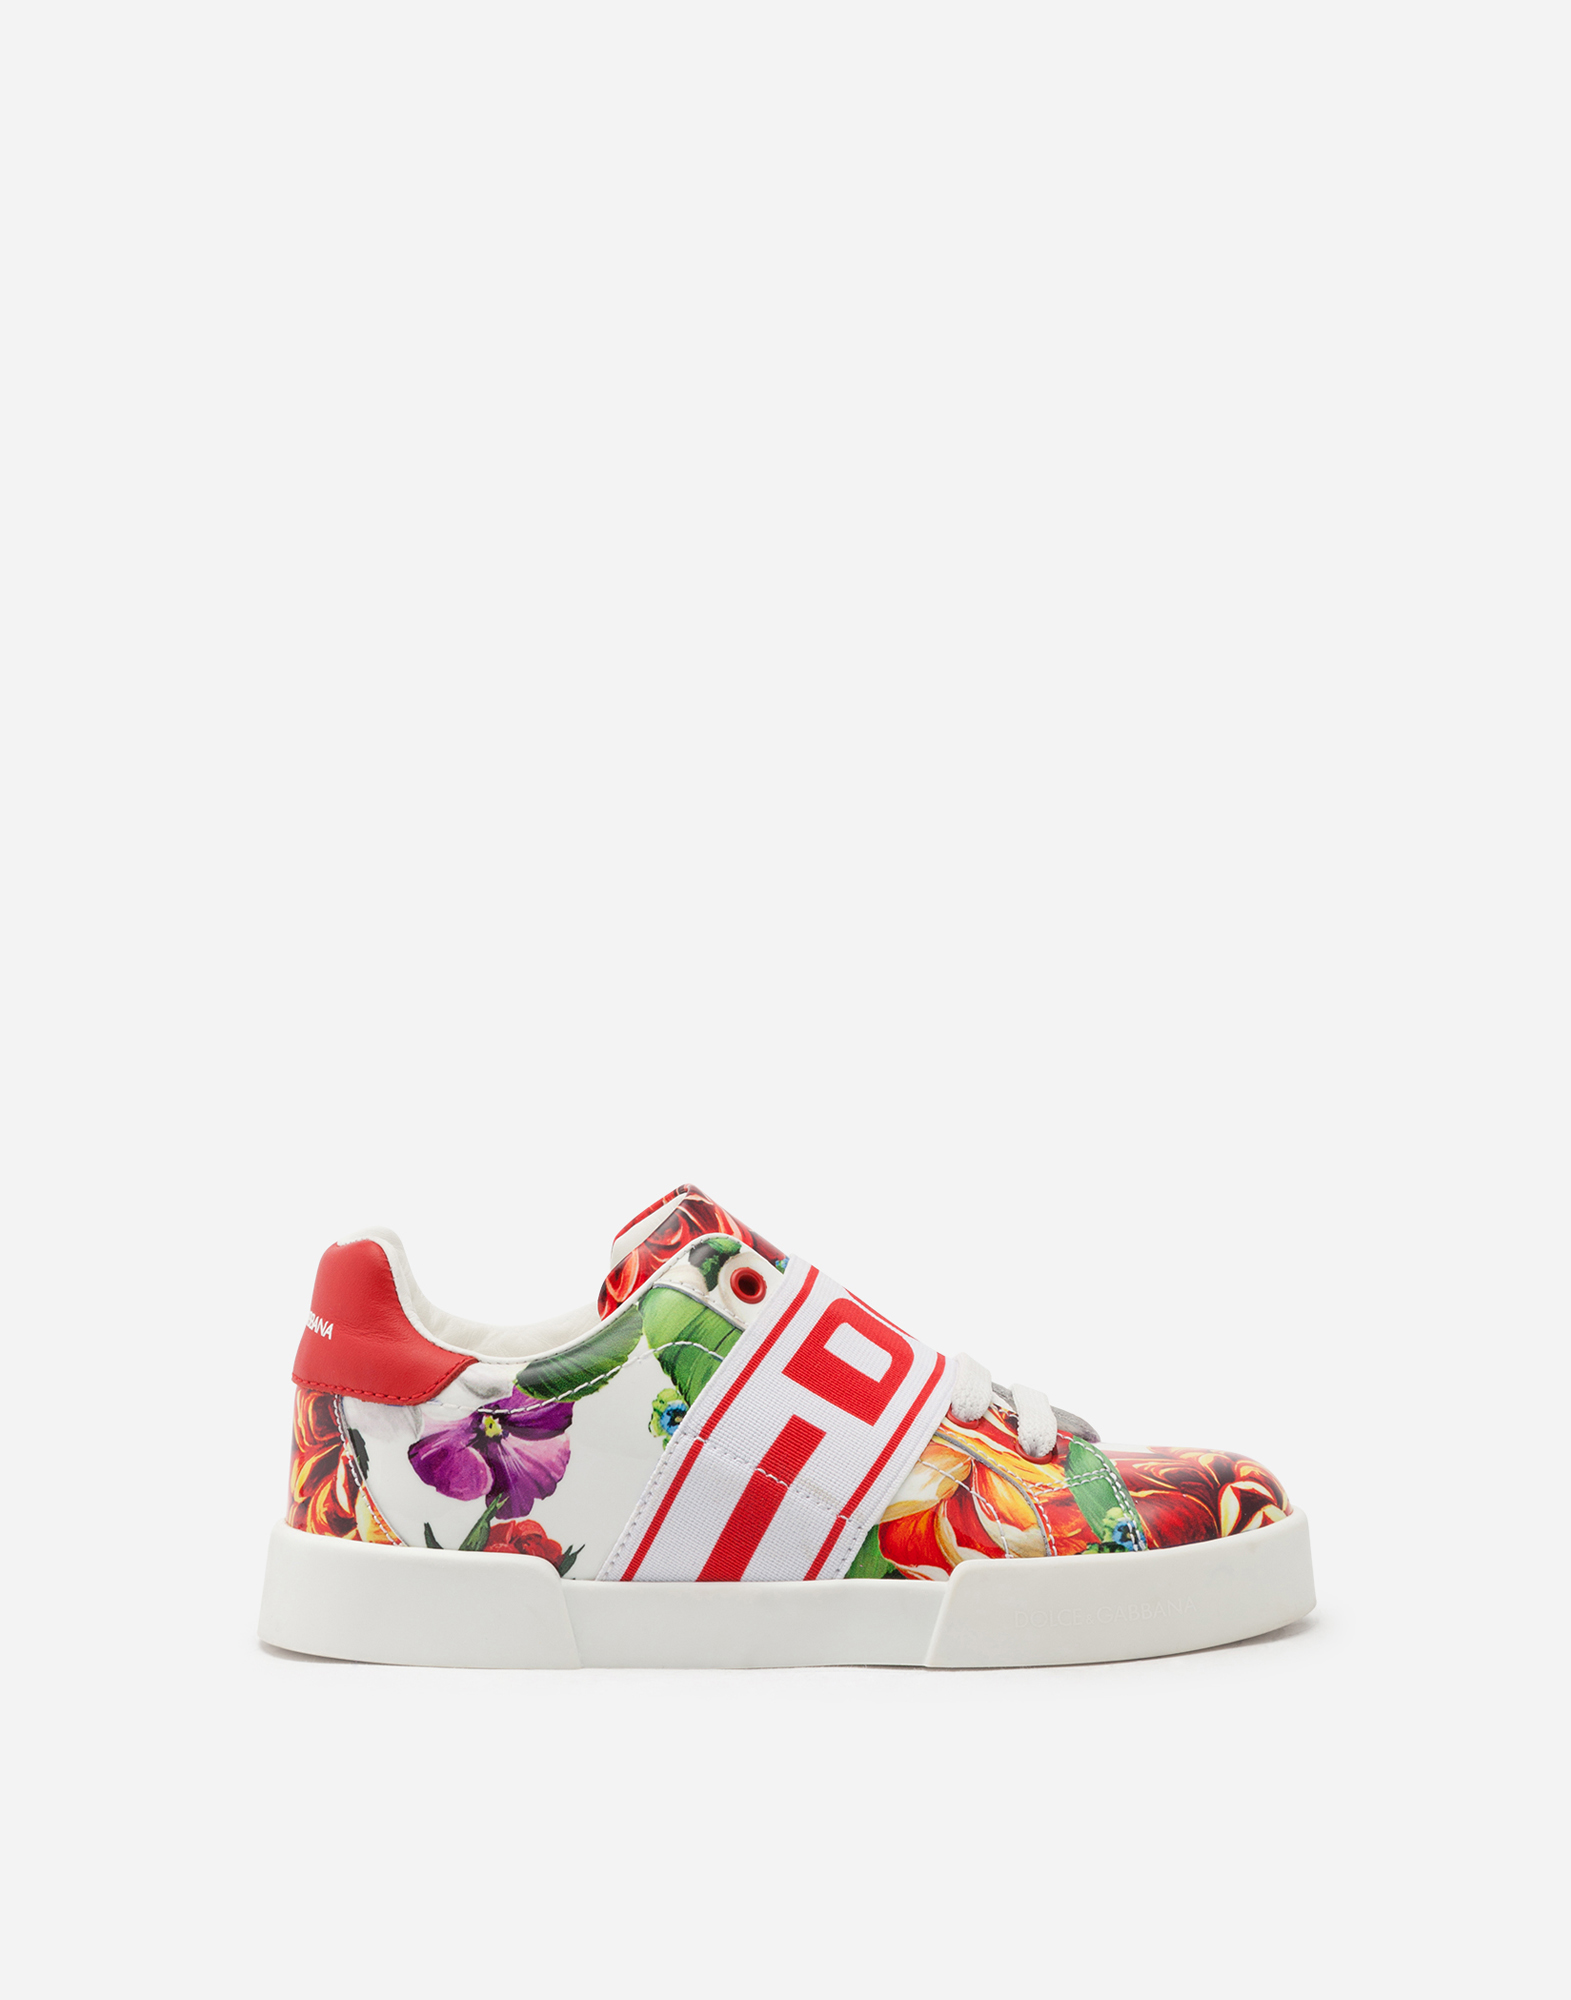 Dolce & Gabbana Kids' Portofino Light Sneakers In Patent Leather With Blooming Print